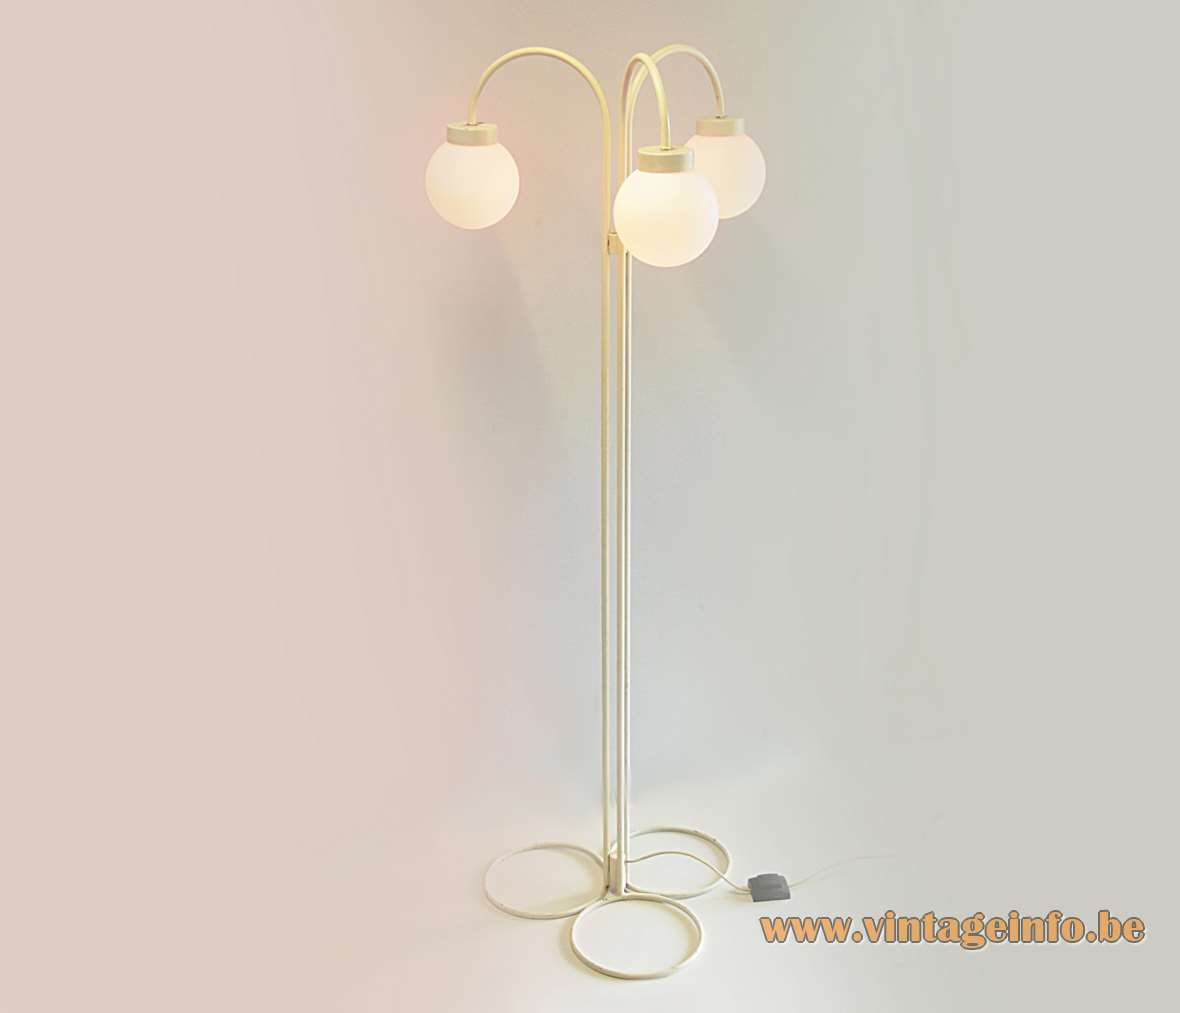  1960s white globes floor Lamp with 3 opal glass lampshades open circle base iron rods 1950s